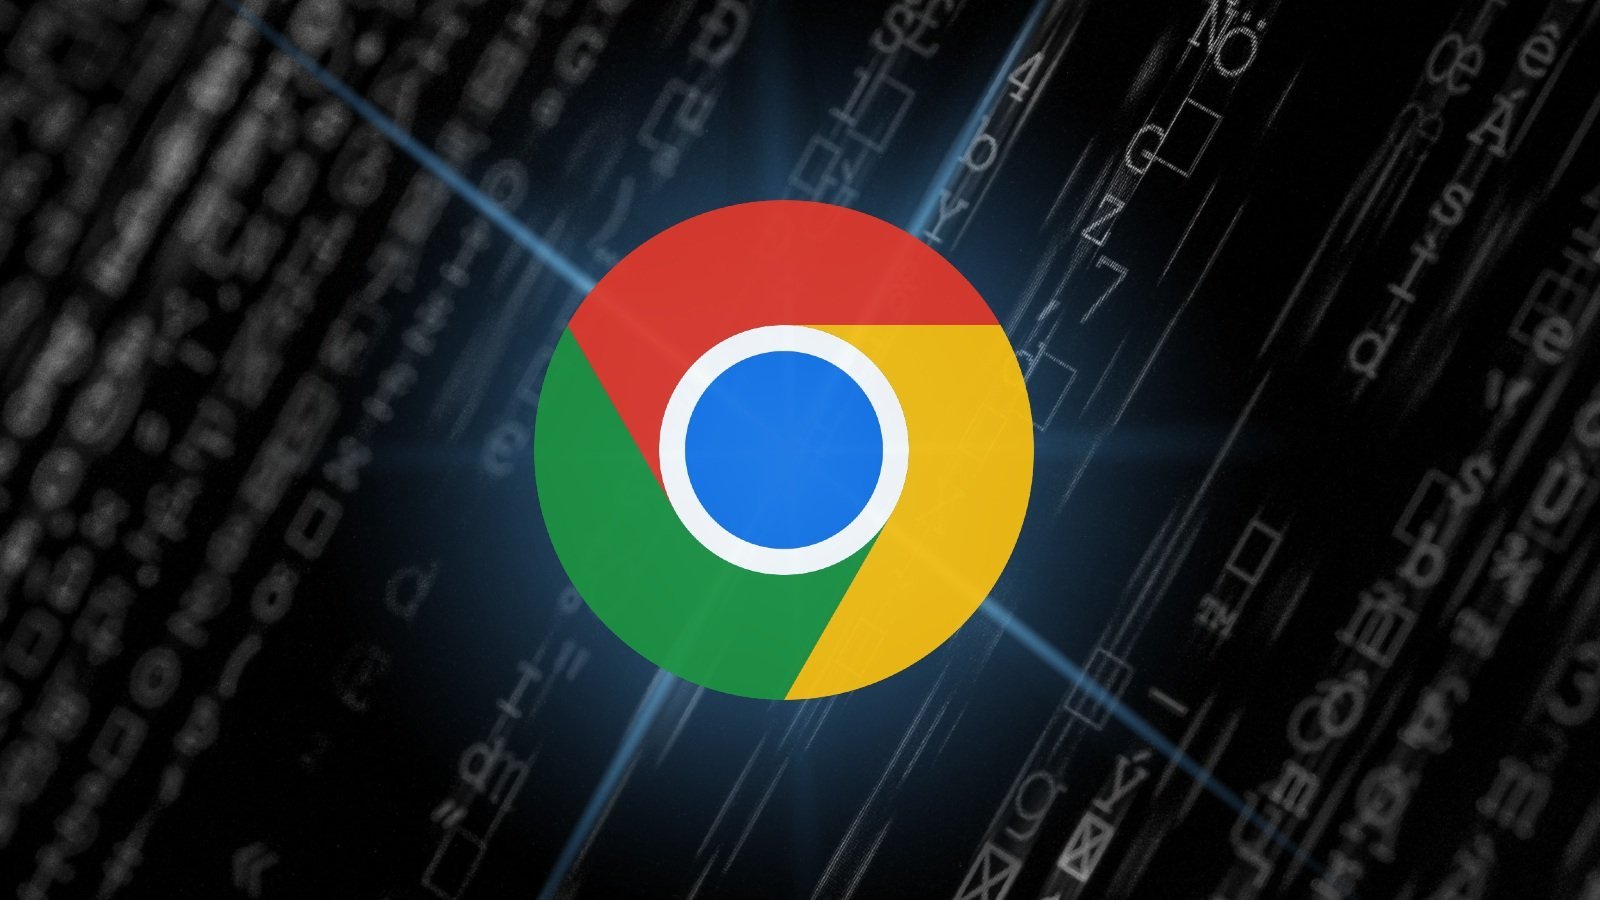 Google rolls out Privacy Sandbox to use Chrome browsing history for ads – Source: www.bleepingcomputer.com